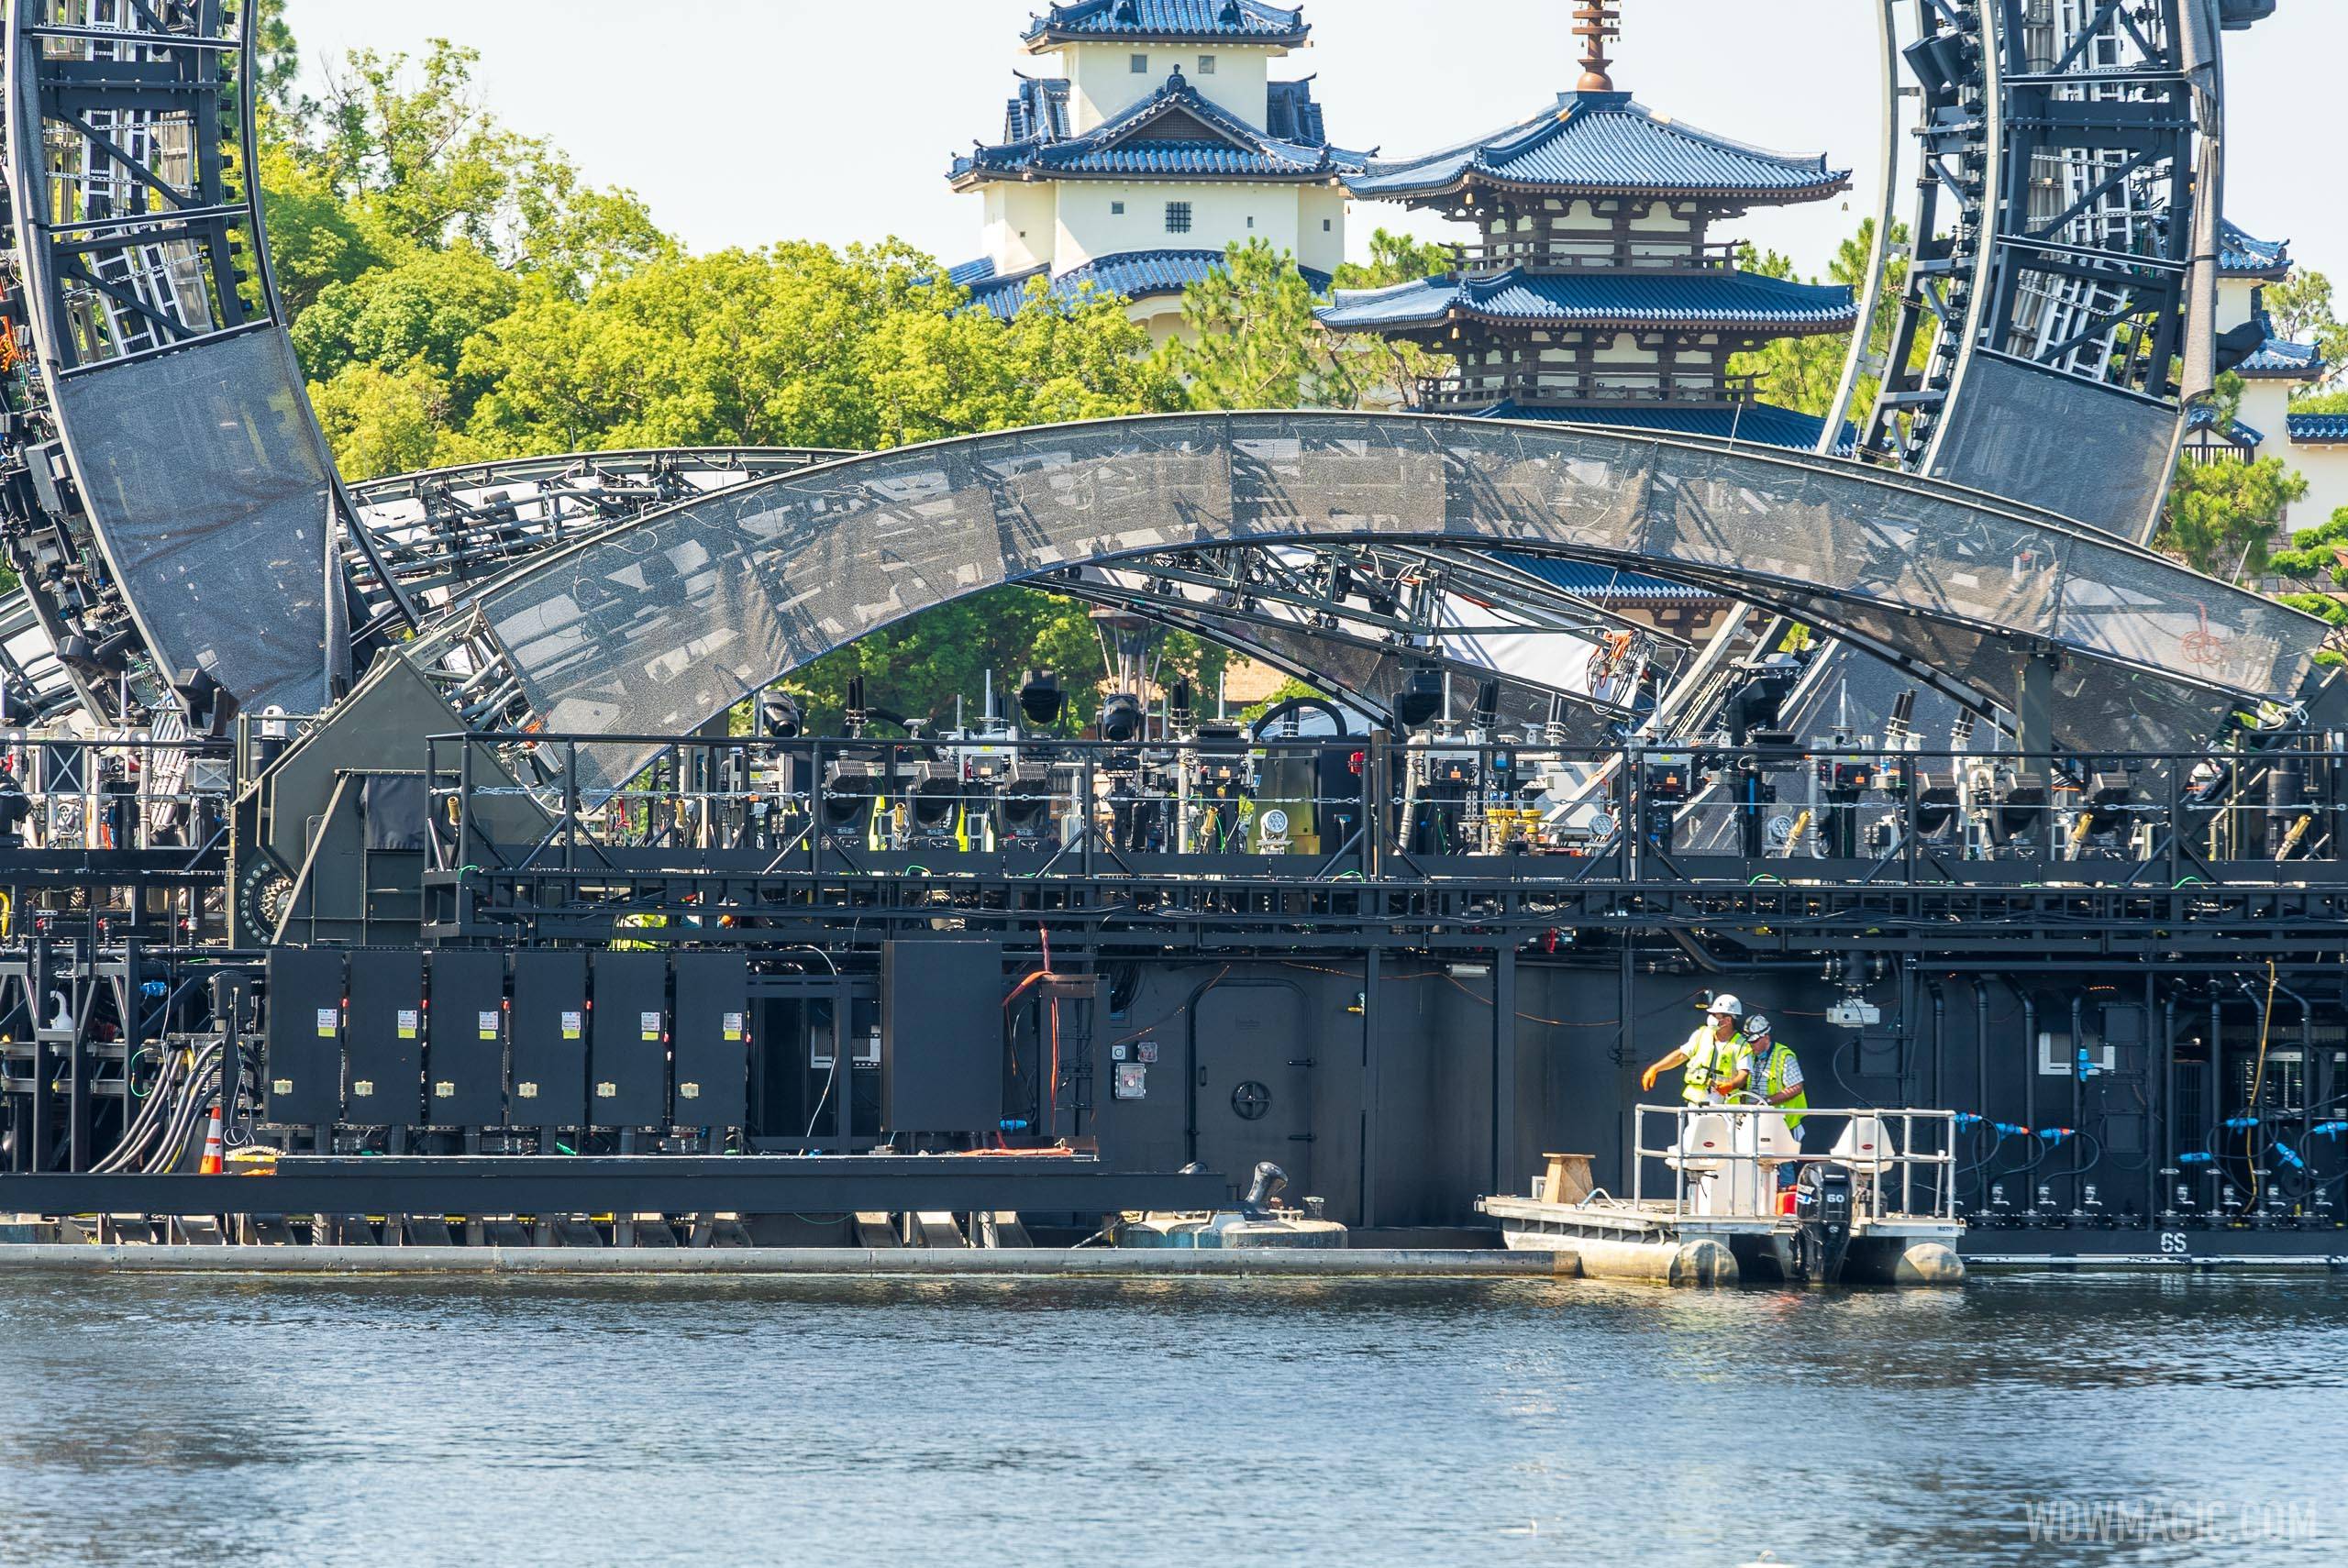 Harmonious barge painting moves to the central icon platform at EPCOT